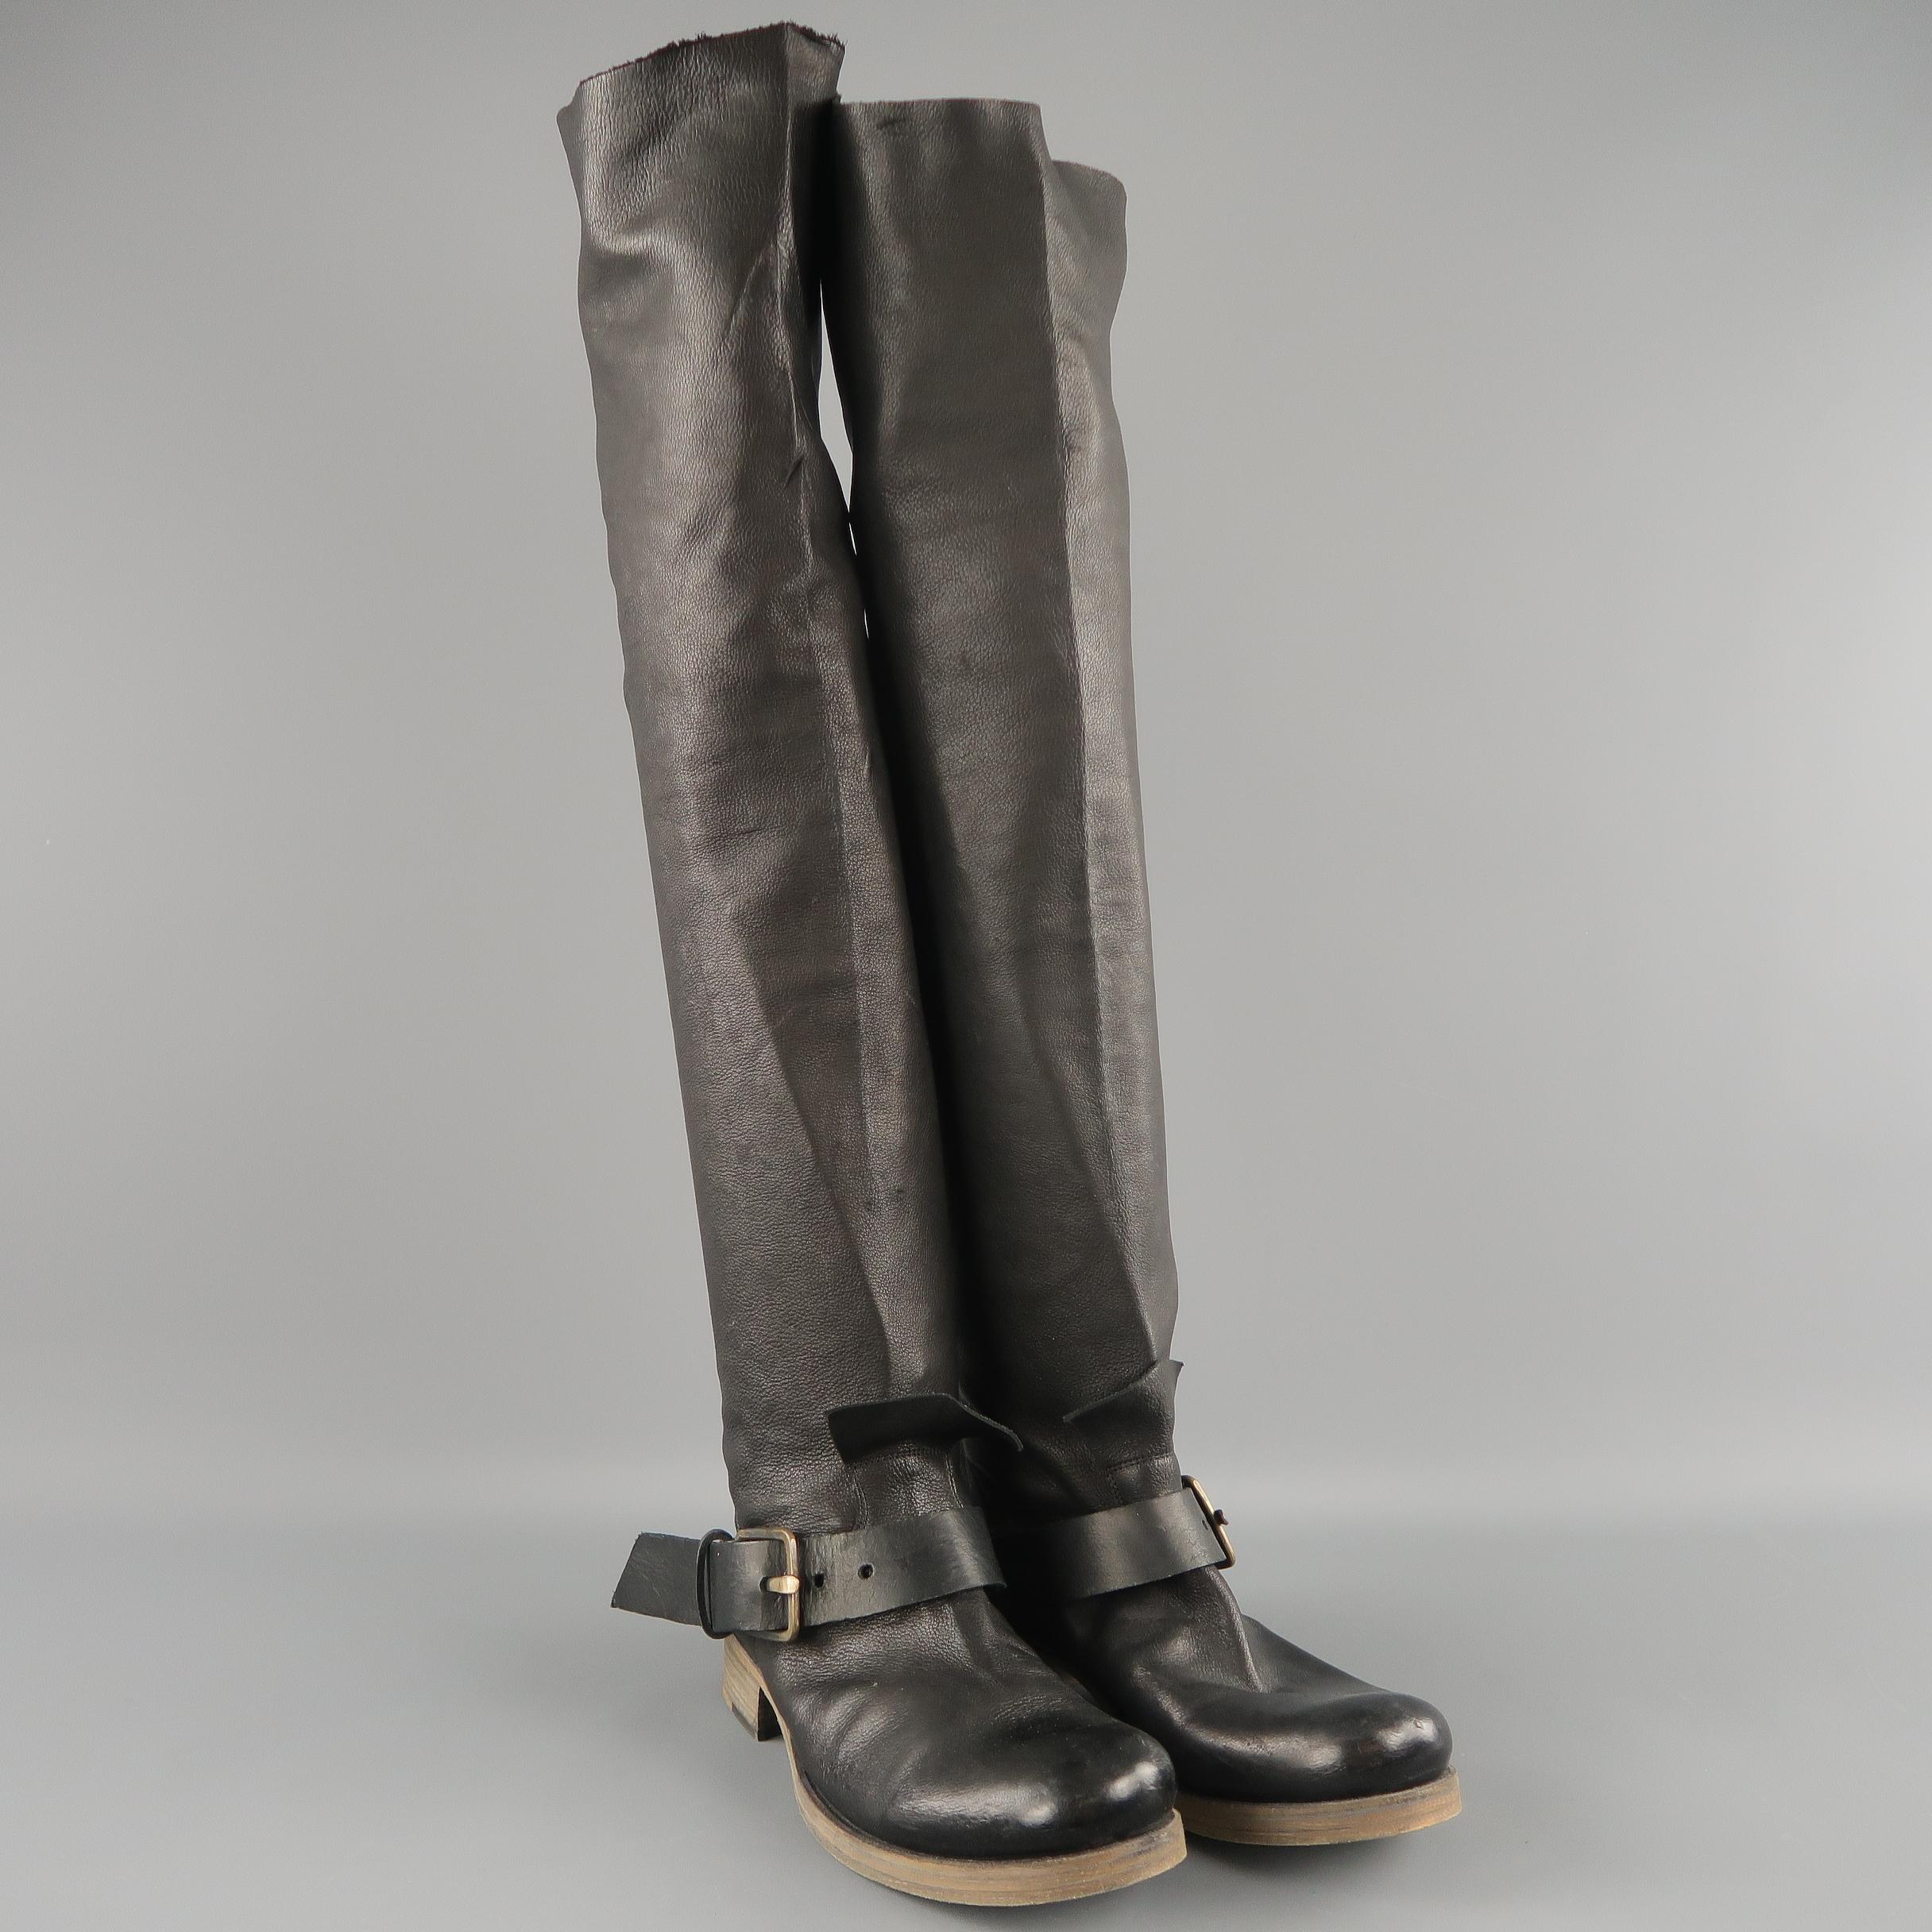 GUIDI thigh high biker boots come in textured leather with a round toe, stacked beige heeled sole, thick ankle strap with buckle, tongue, and raw edge hem at top. Made in Italy.
 
Excellent Pre-Owned Condition. Retails: $2,090.00.
Marked: IT 37
